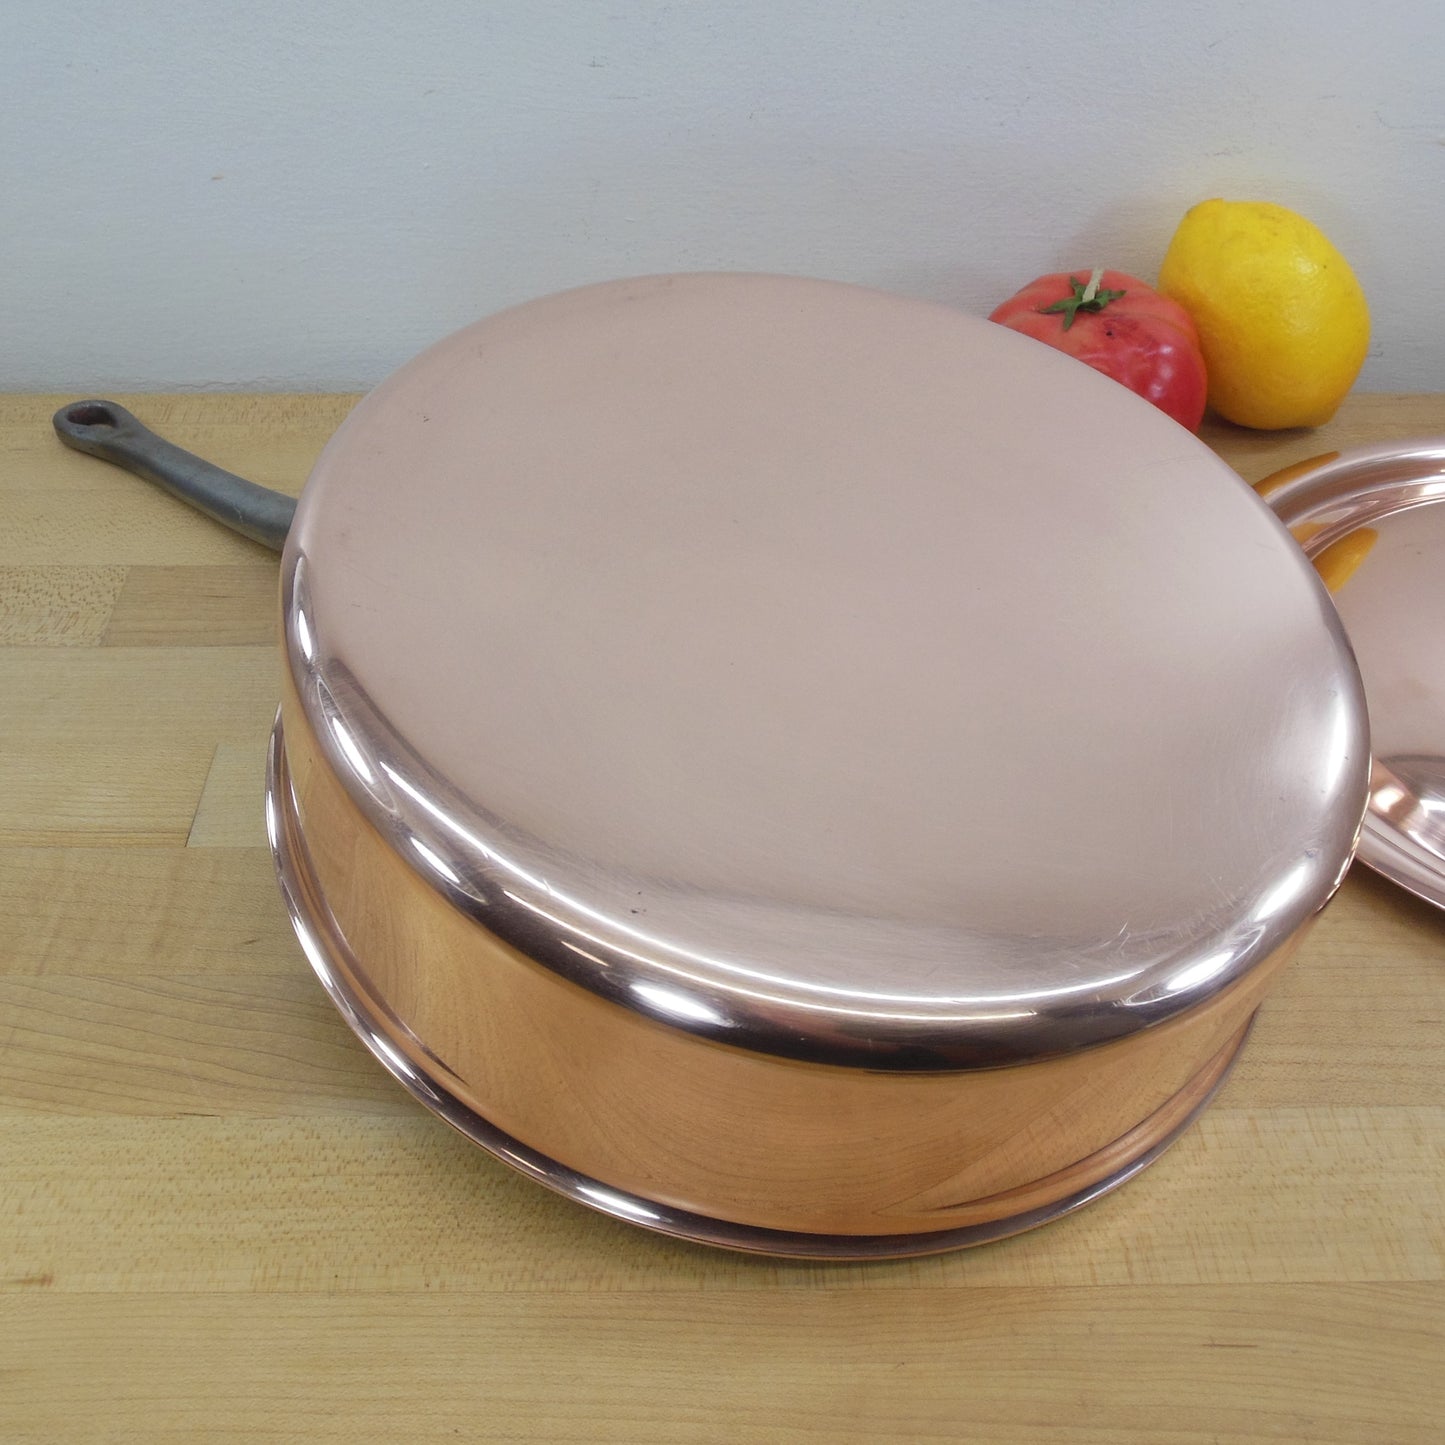 Unbranded Mauviel France Copper Stainless 3.5 Quart Sauté Pan & Cover Cleaned